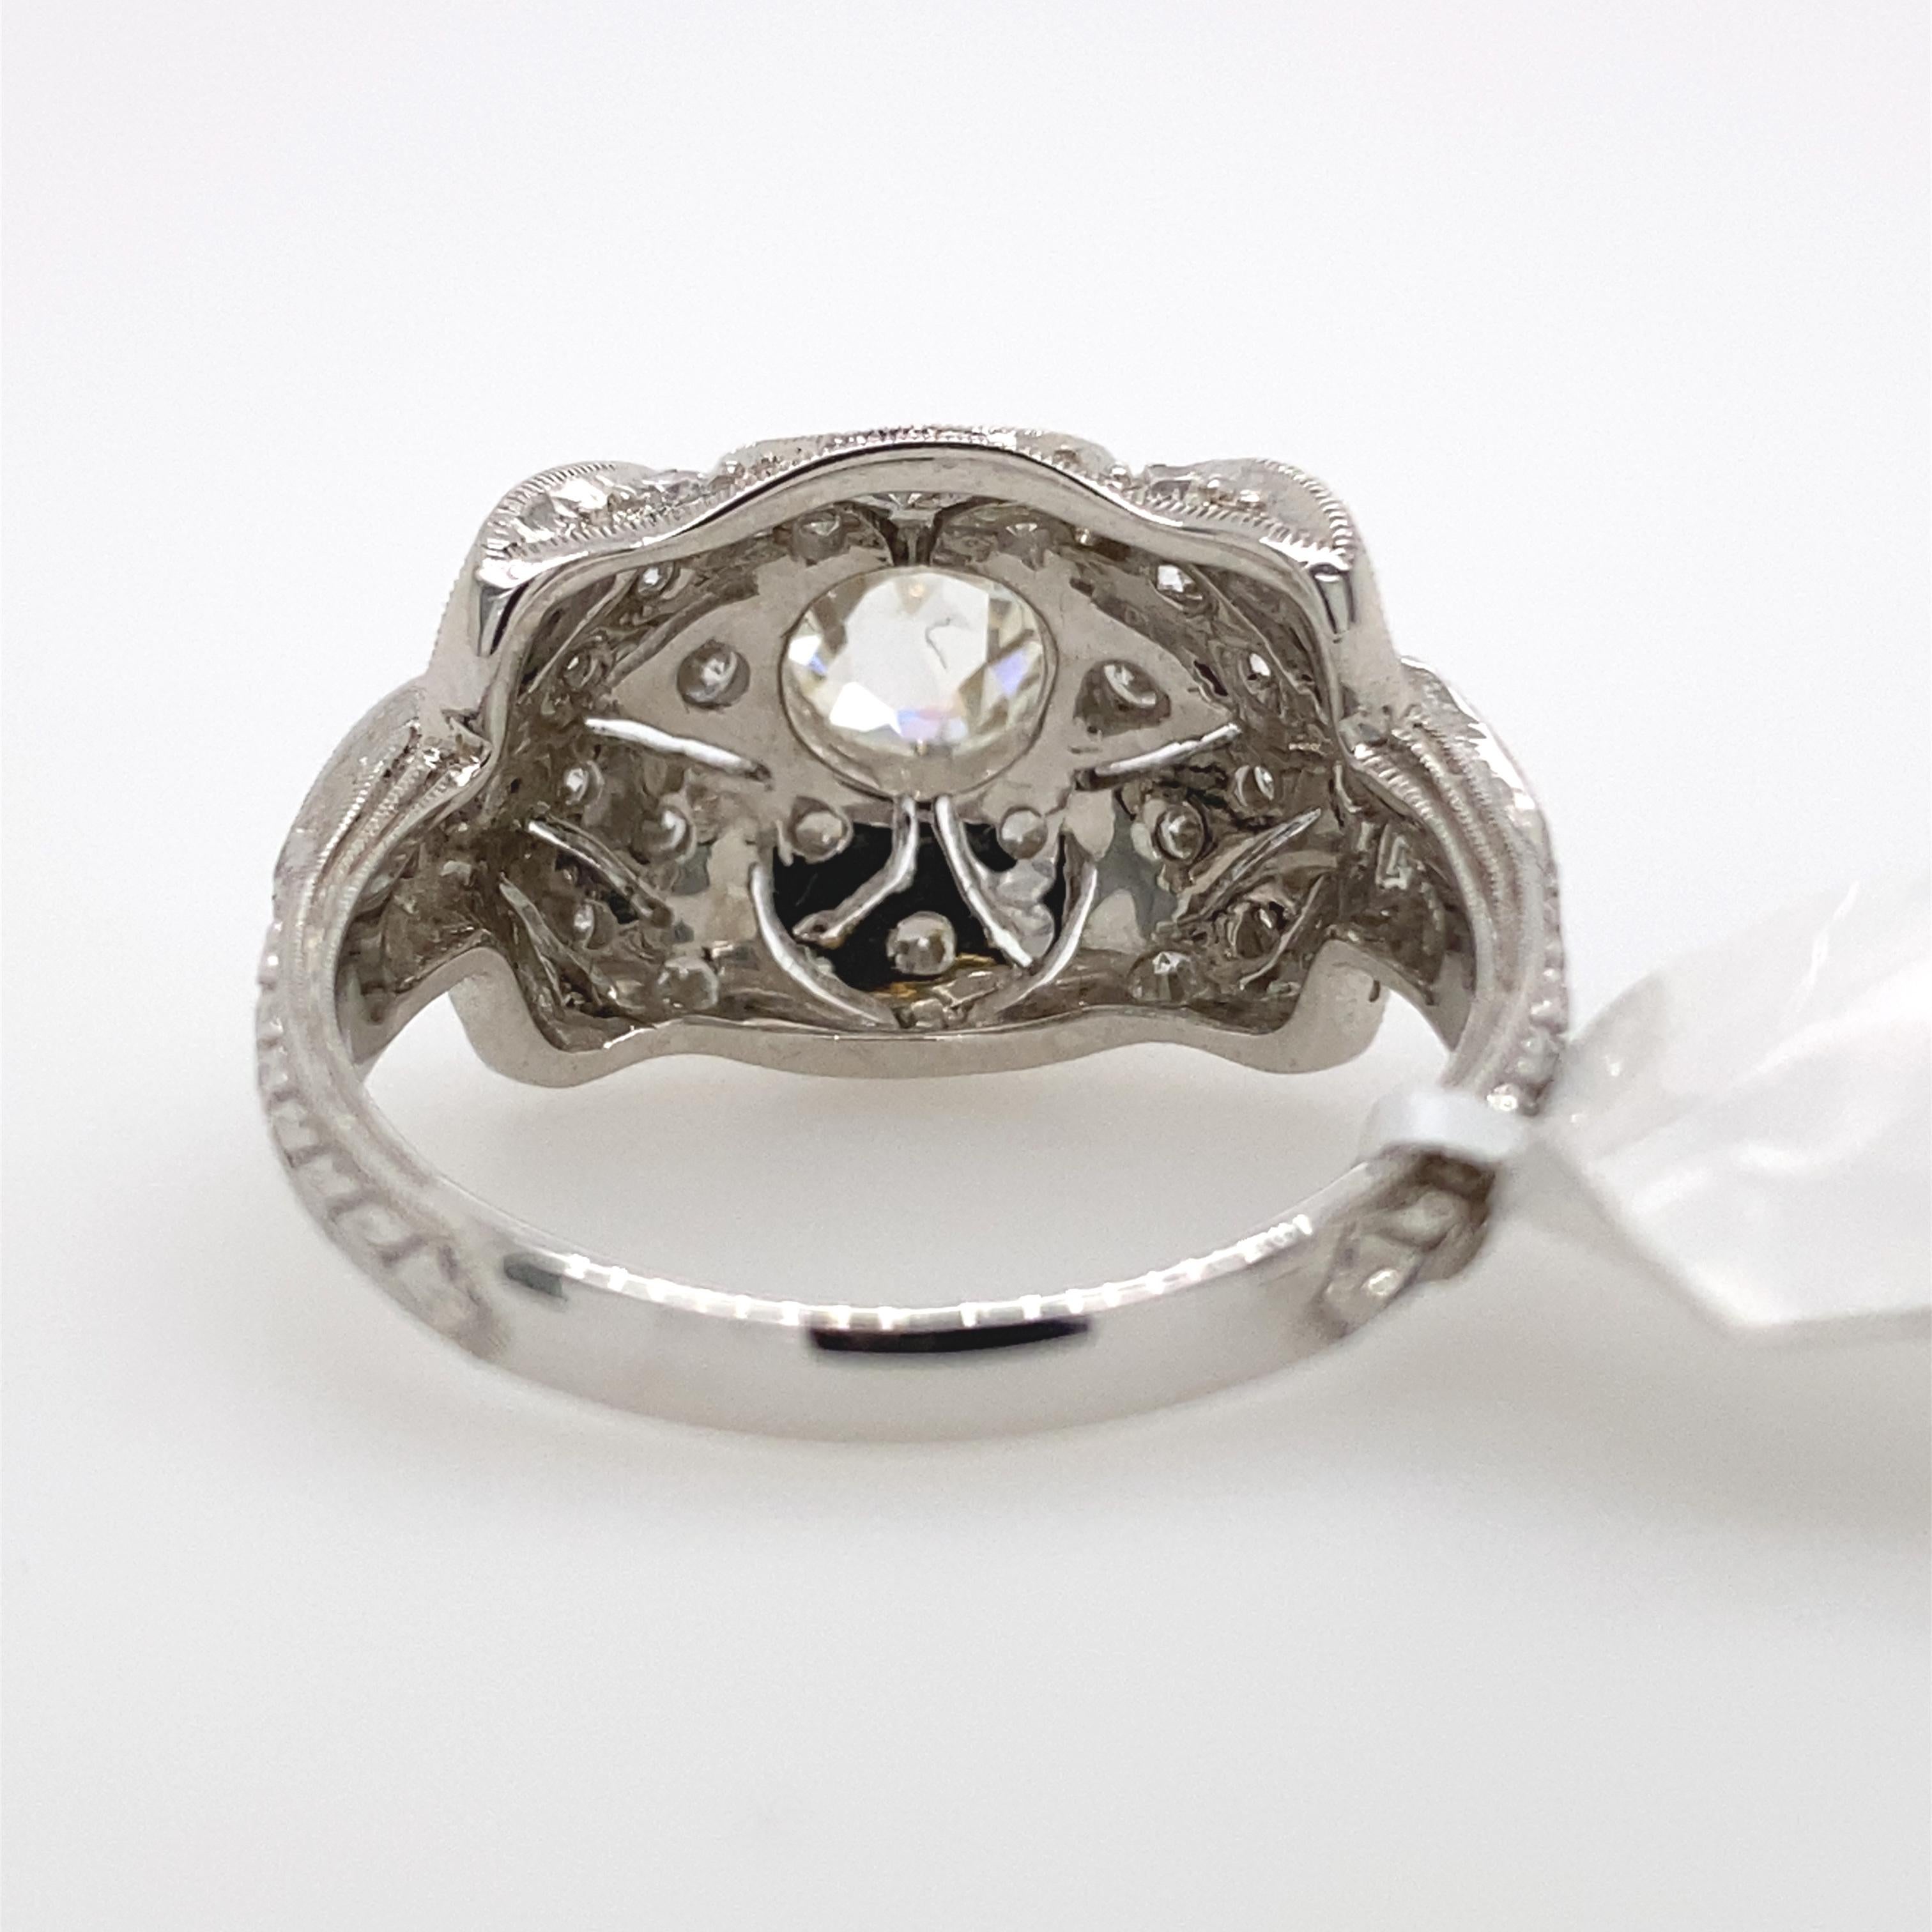 1.49 Carat Edwardian Inspired Diamond Ring 18 Karat White Gold In New Condition For Sale In BEVERLY HILLS, CA